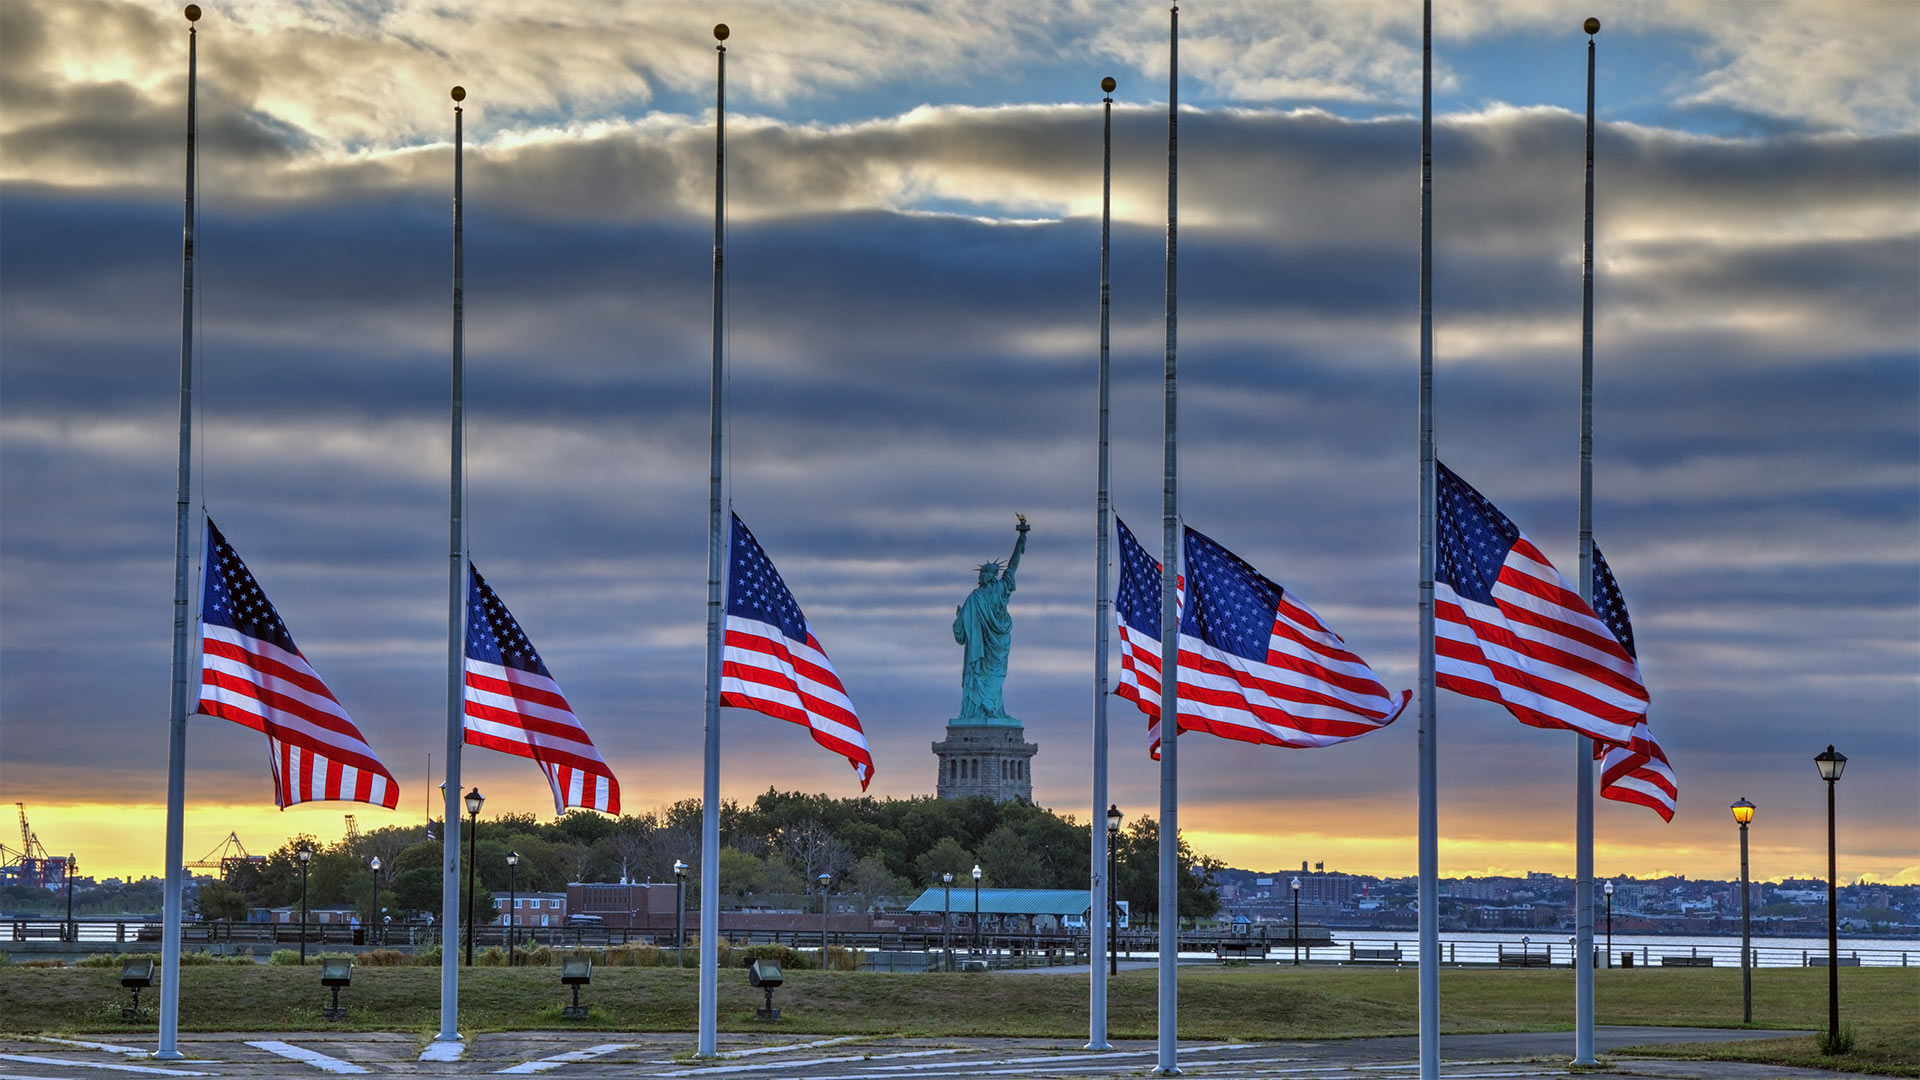 Statue of Liberty seen behind US flags at half-staff for the anniversary of September 11 in 2014, New York City - Adam Parent/Shutterstock)